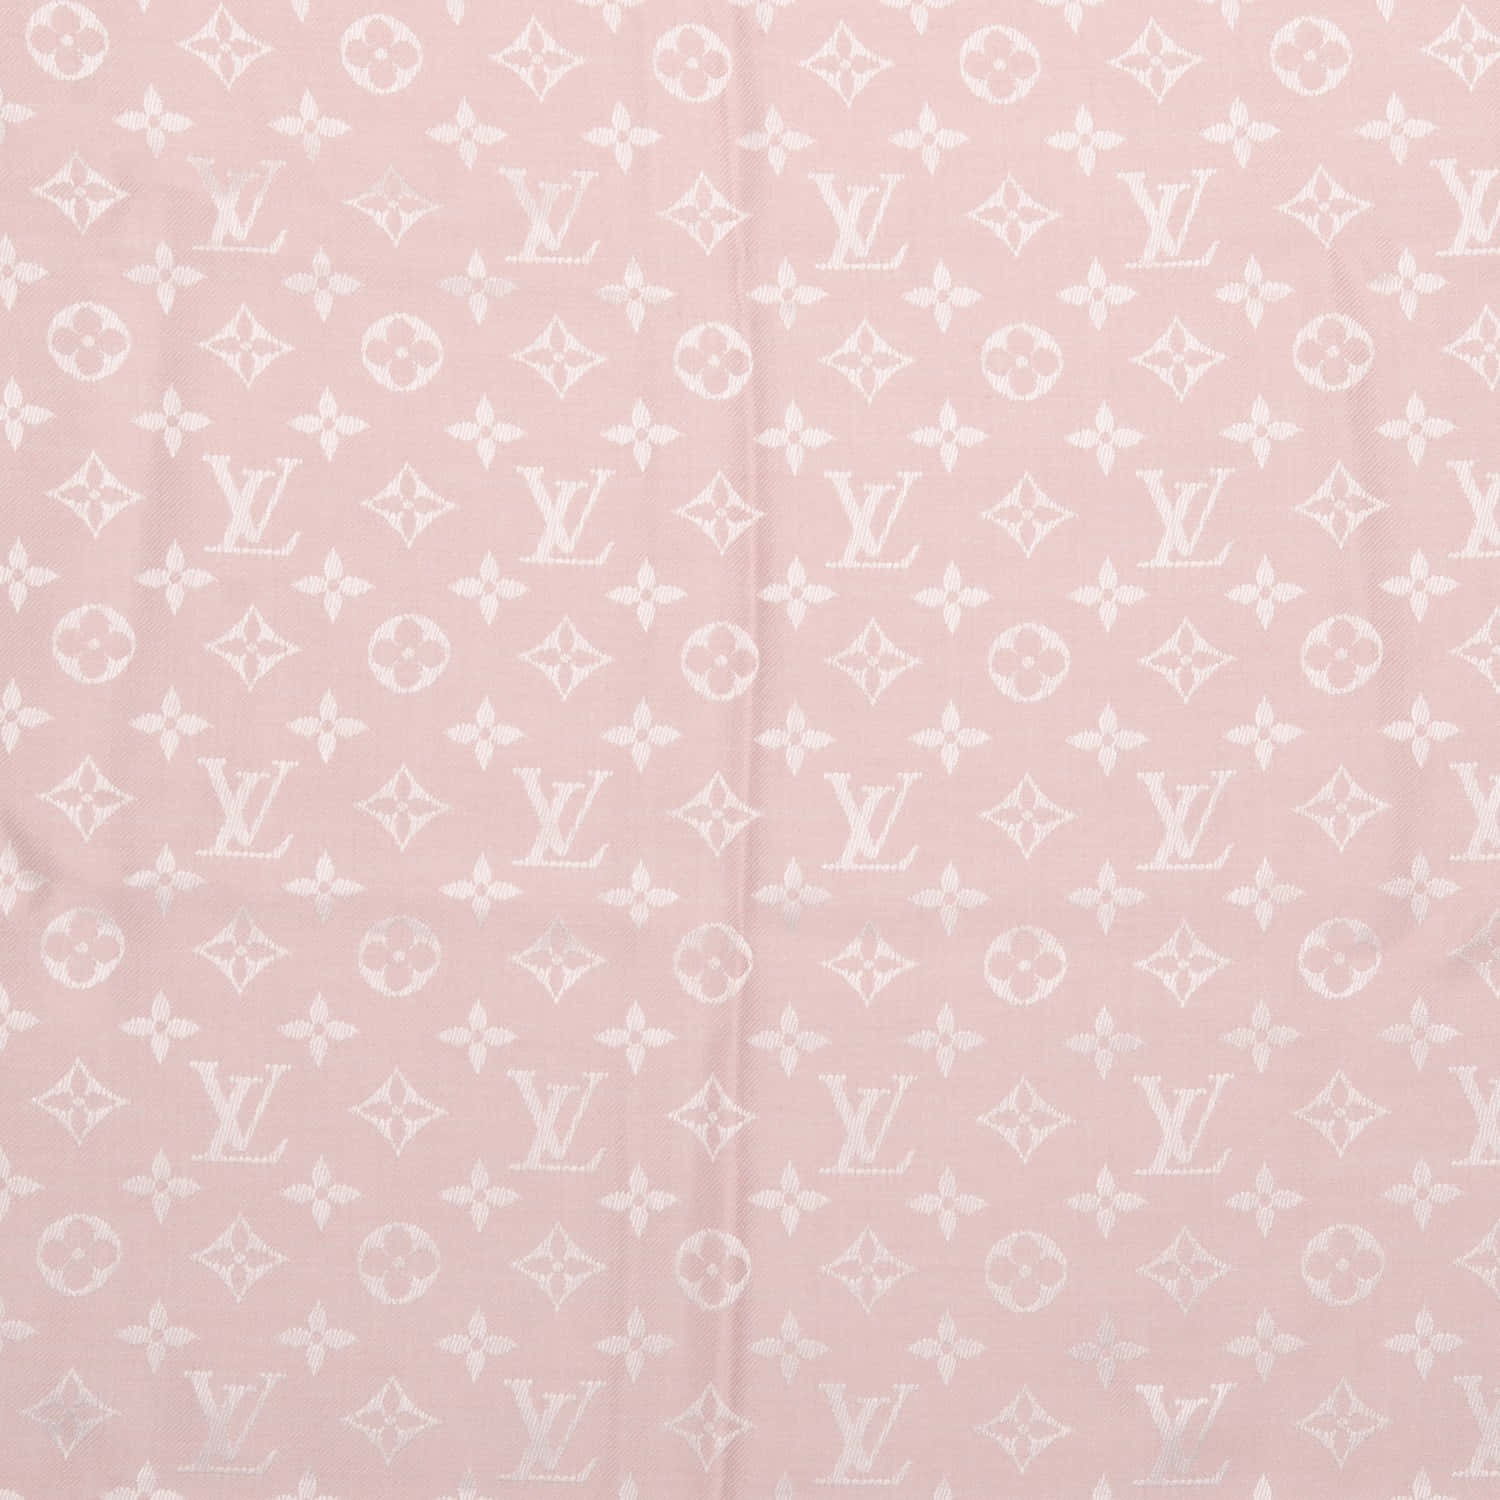 Take a look at this stylish and fashionable Louis Vuitton Pink Monogram print bag. Wallpaper